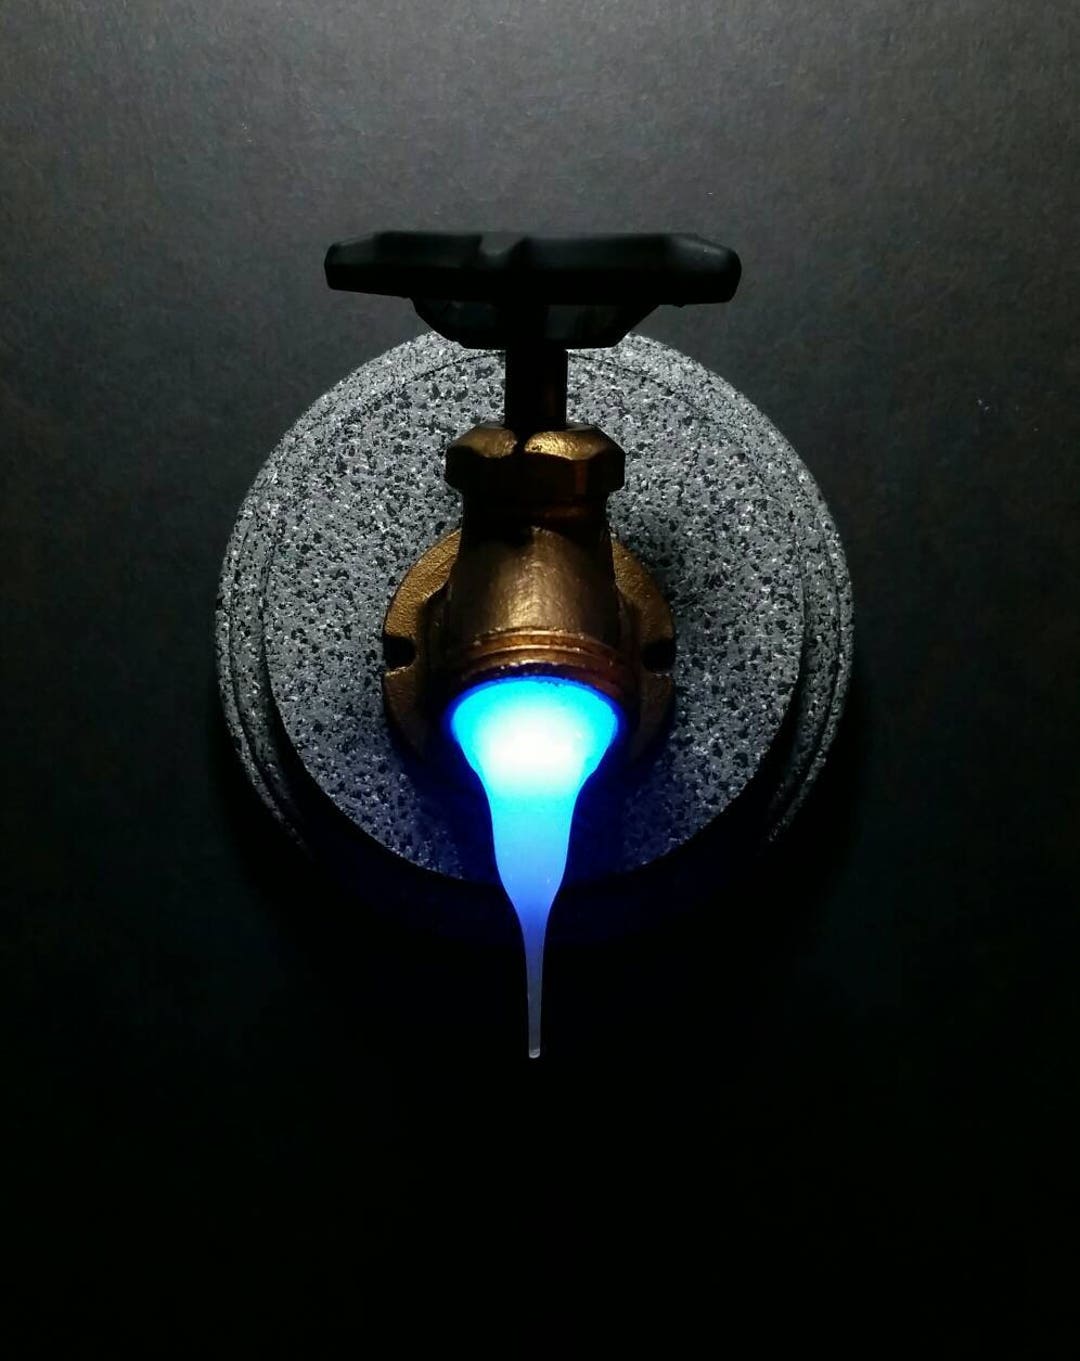 How to make an Oozing Faucet Nightlight 